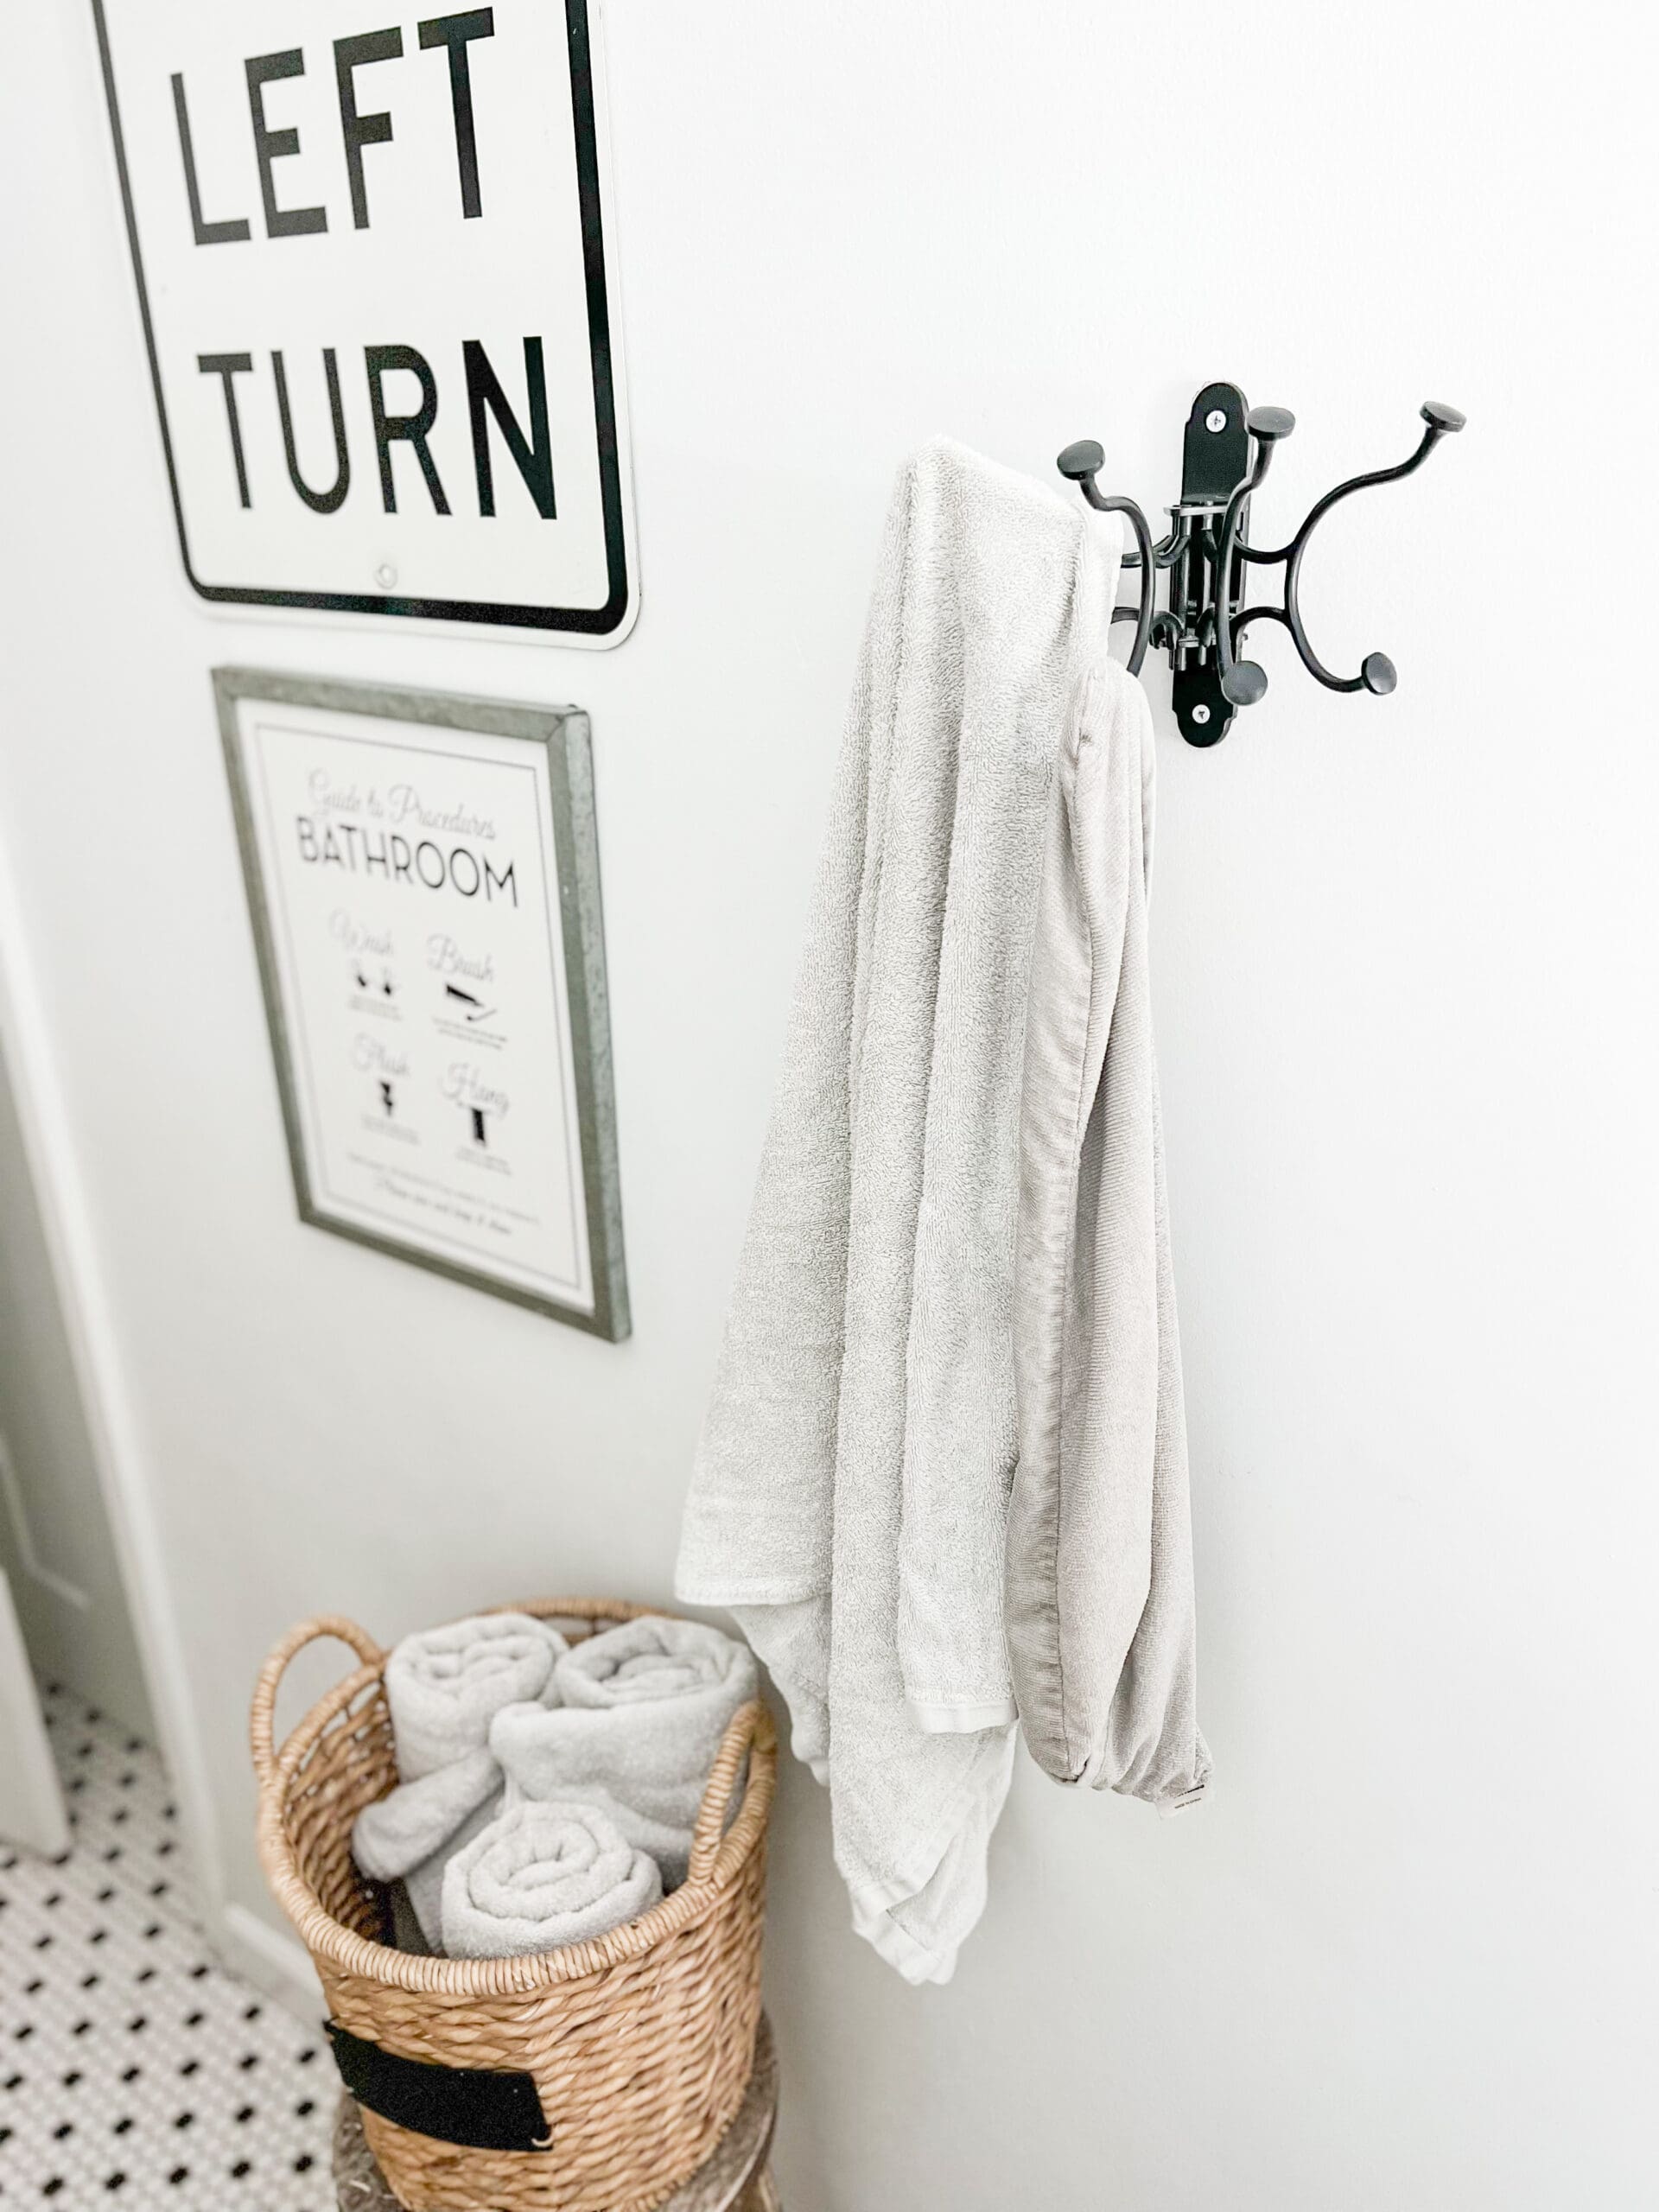 Towel hook from Pottery Barn easily holds 4-8 towels at a time. The black metal matches its surrounding perfectly.